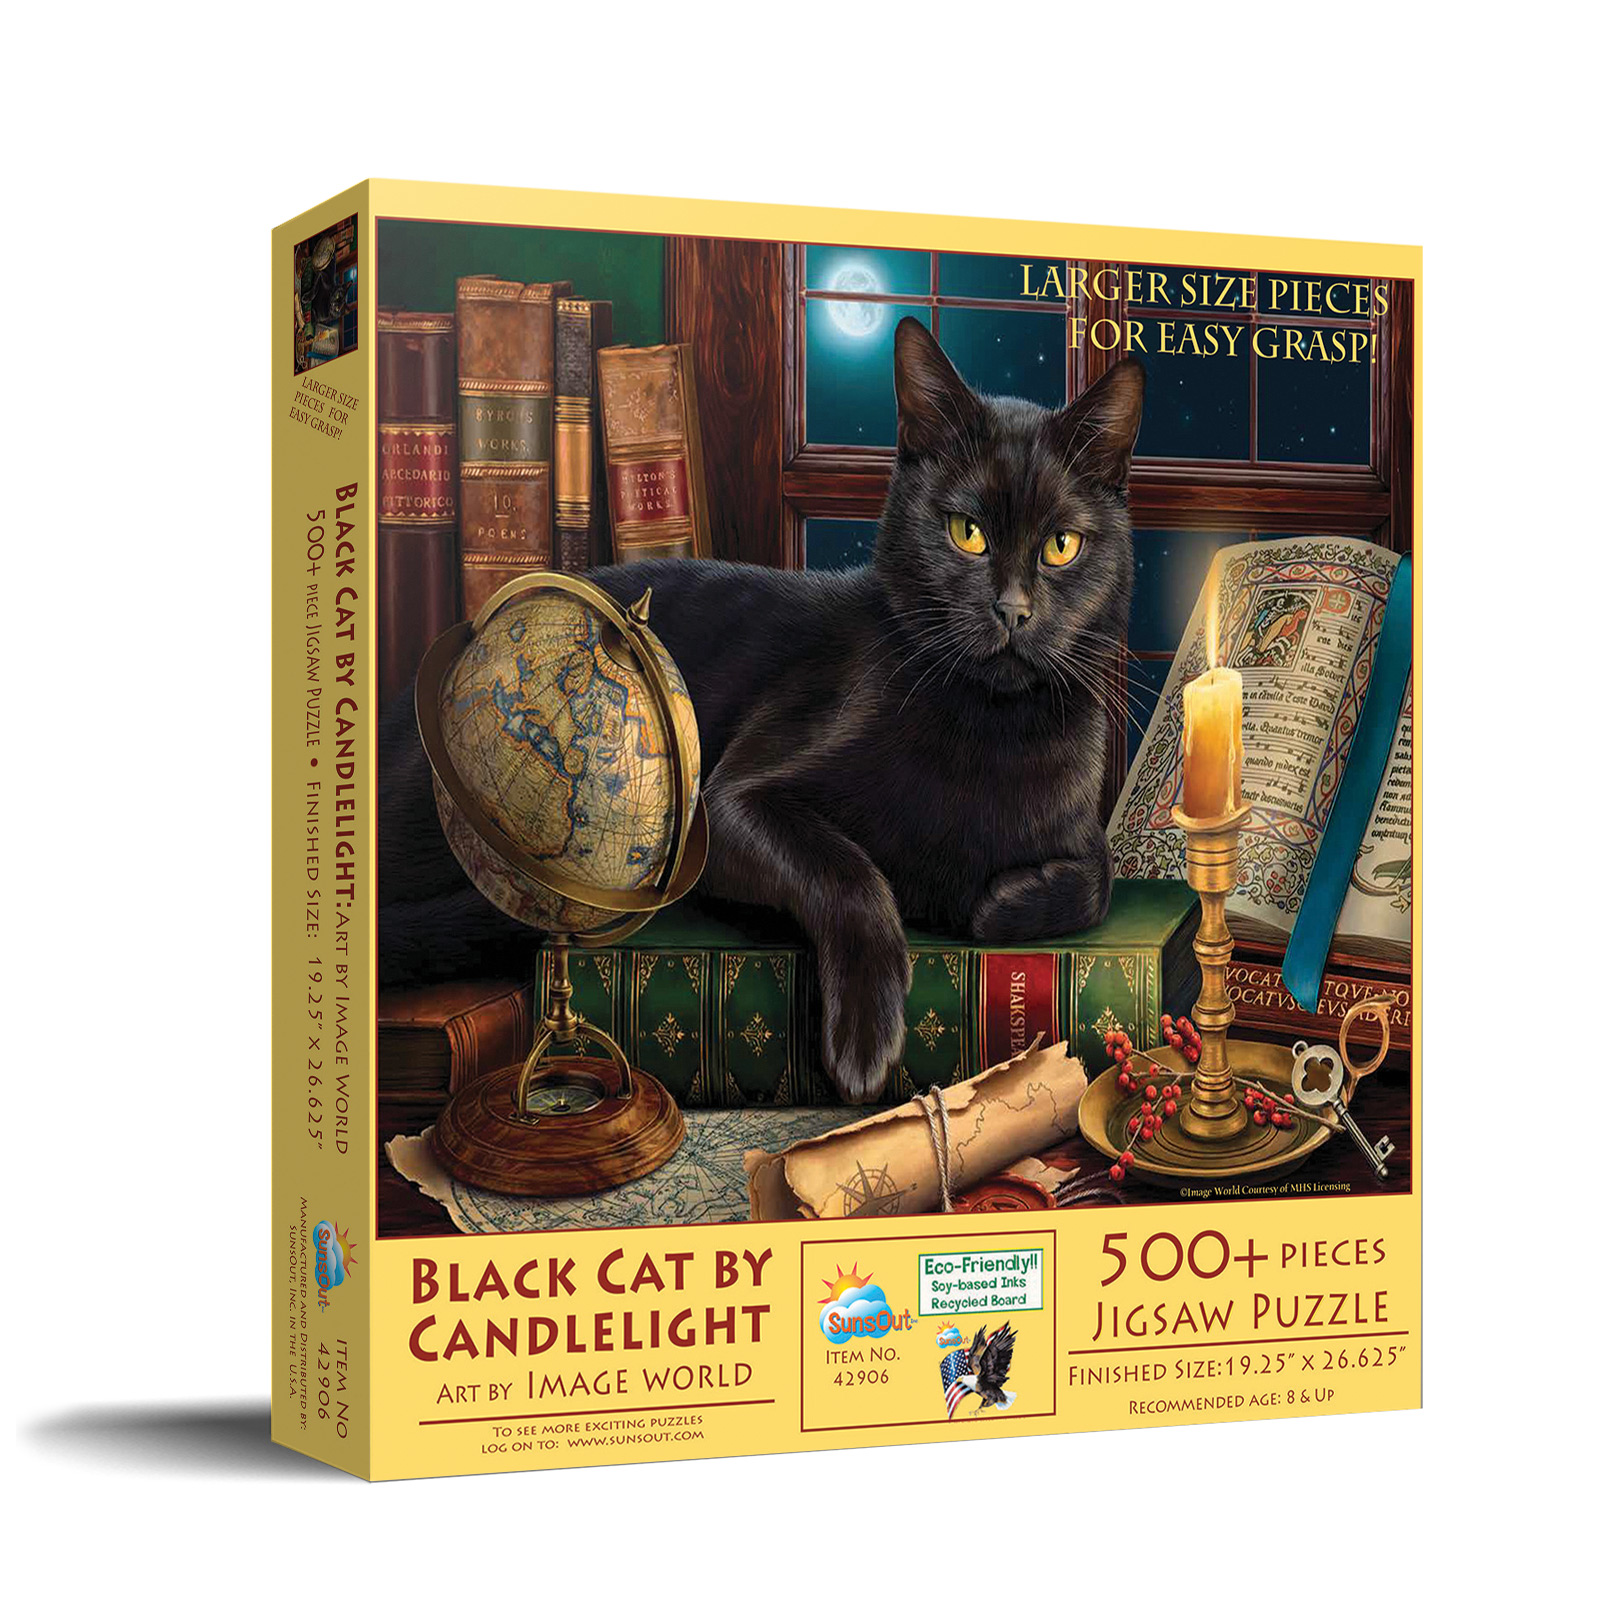 Black Cat by Candlelight